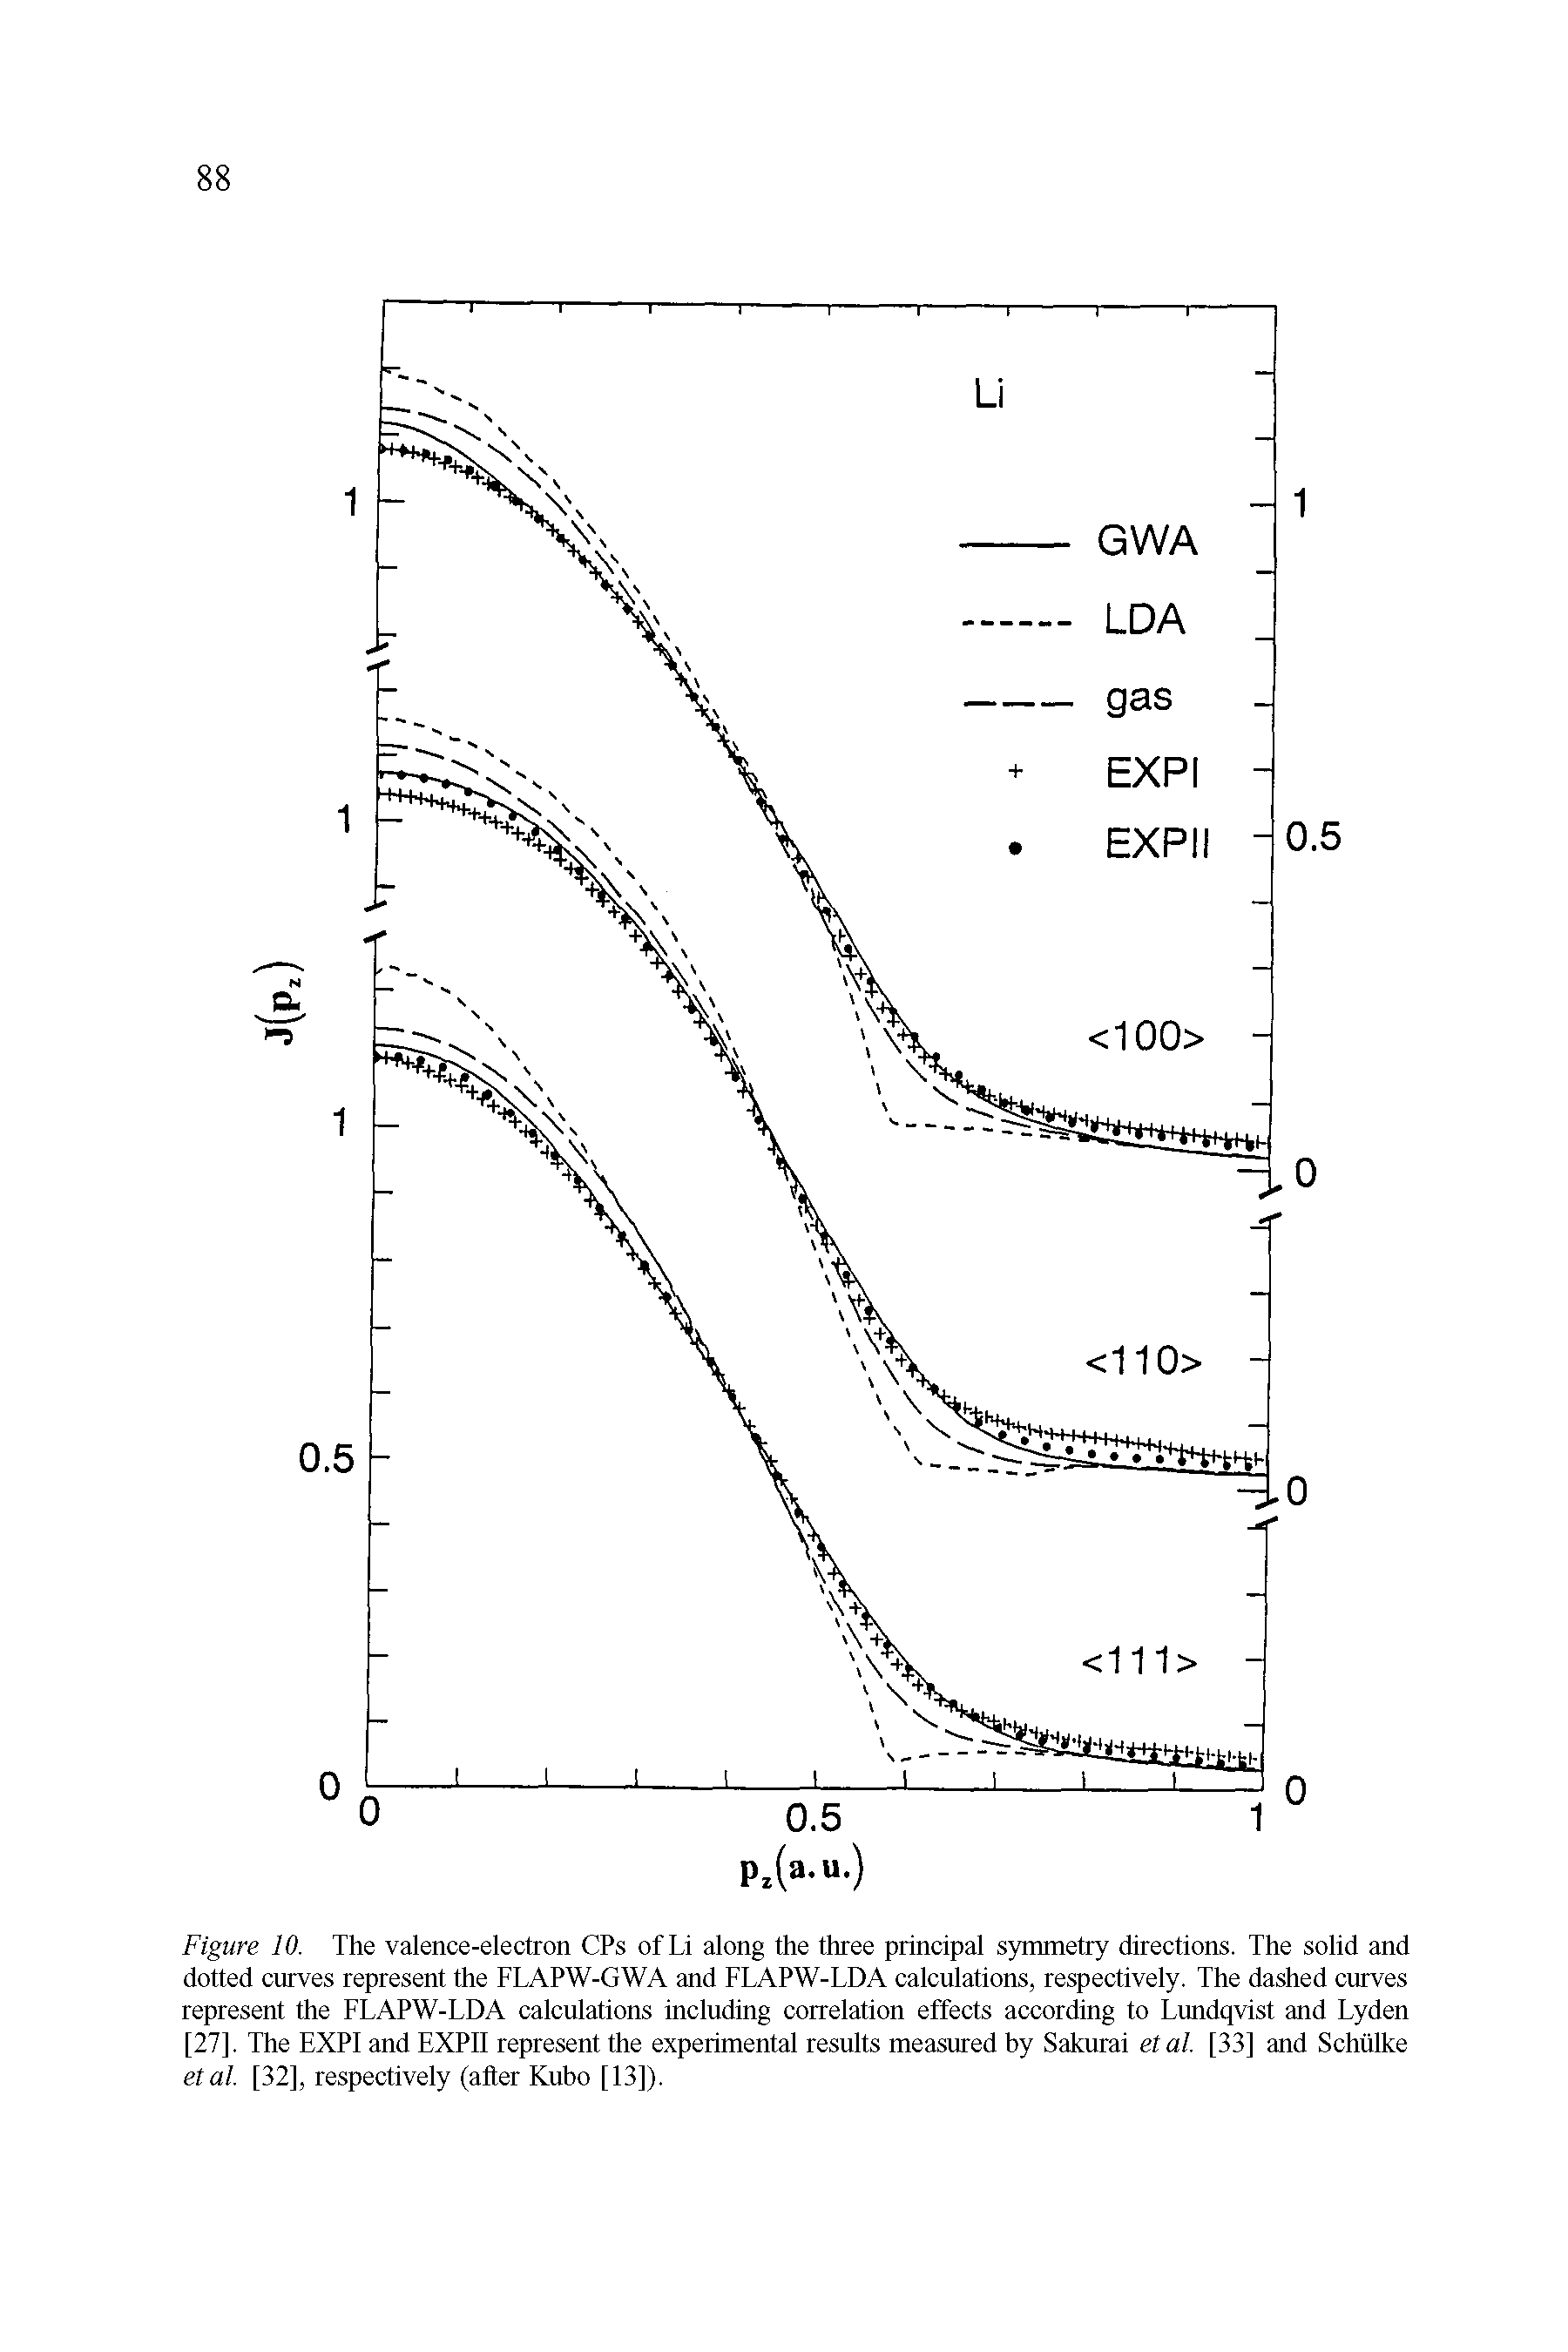 Figure 10. The valence-electron CPs of Li along the three principal symmetry directions. The solid and dotted curves represent the FLAPW-GWA and FLAPW-LDA calculations, respectively. The dashed curves represent the FLAPW-LDA calculations including correlation effects according to Lundqvist and Lyden [27], The EXPI and EXPII represent the experimental results measured by Sakurai etal. [33] and Schillke etal. [32], respectively (after Kubo [13]).